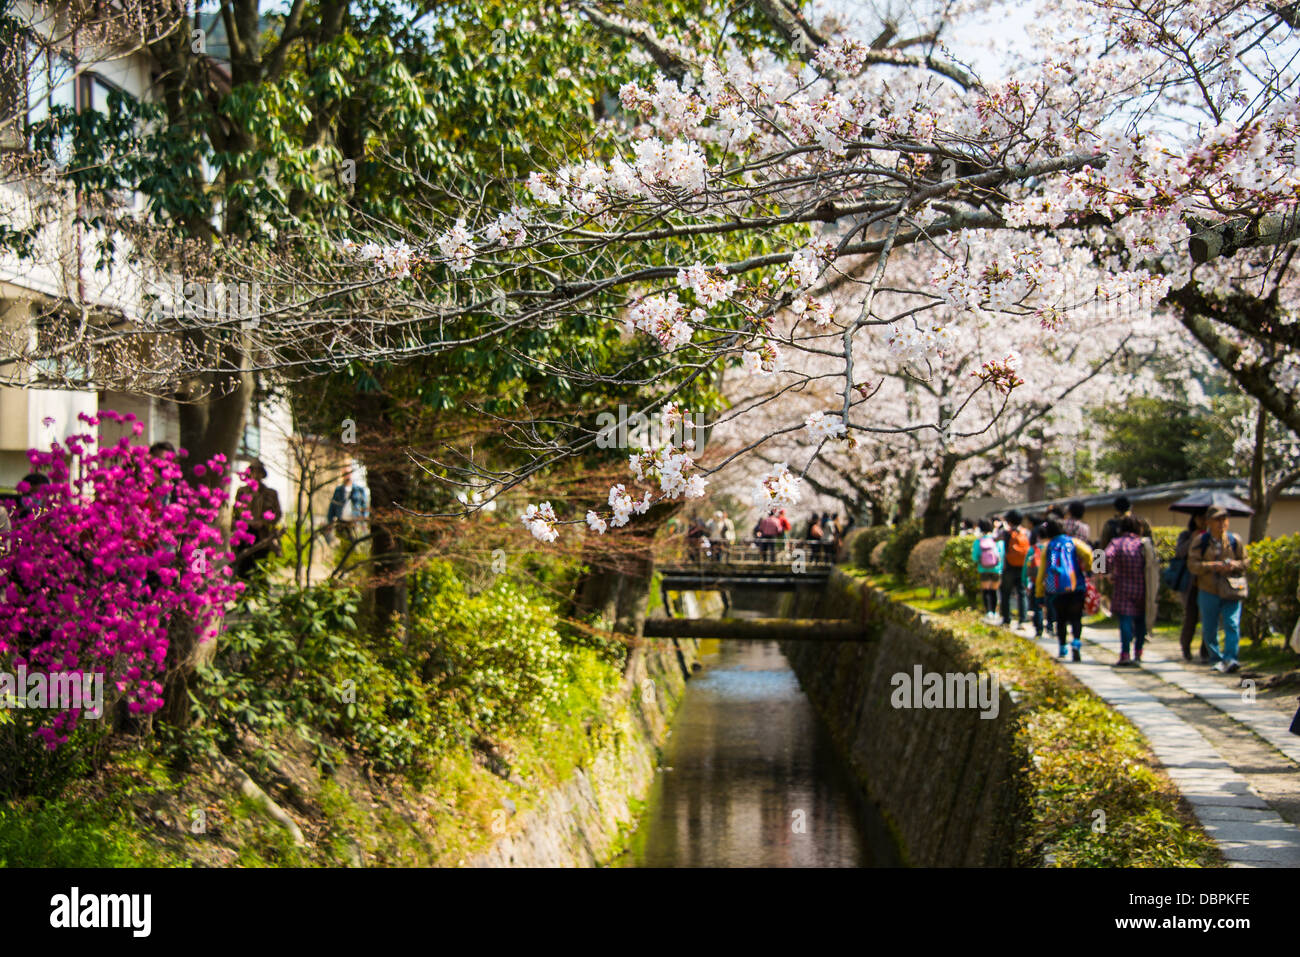 Cherry blossom in the Philosopher's Walk, Kyoto, Japan, Asia Stock Photo